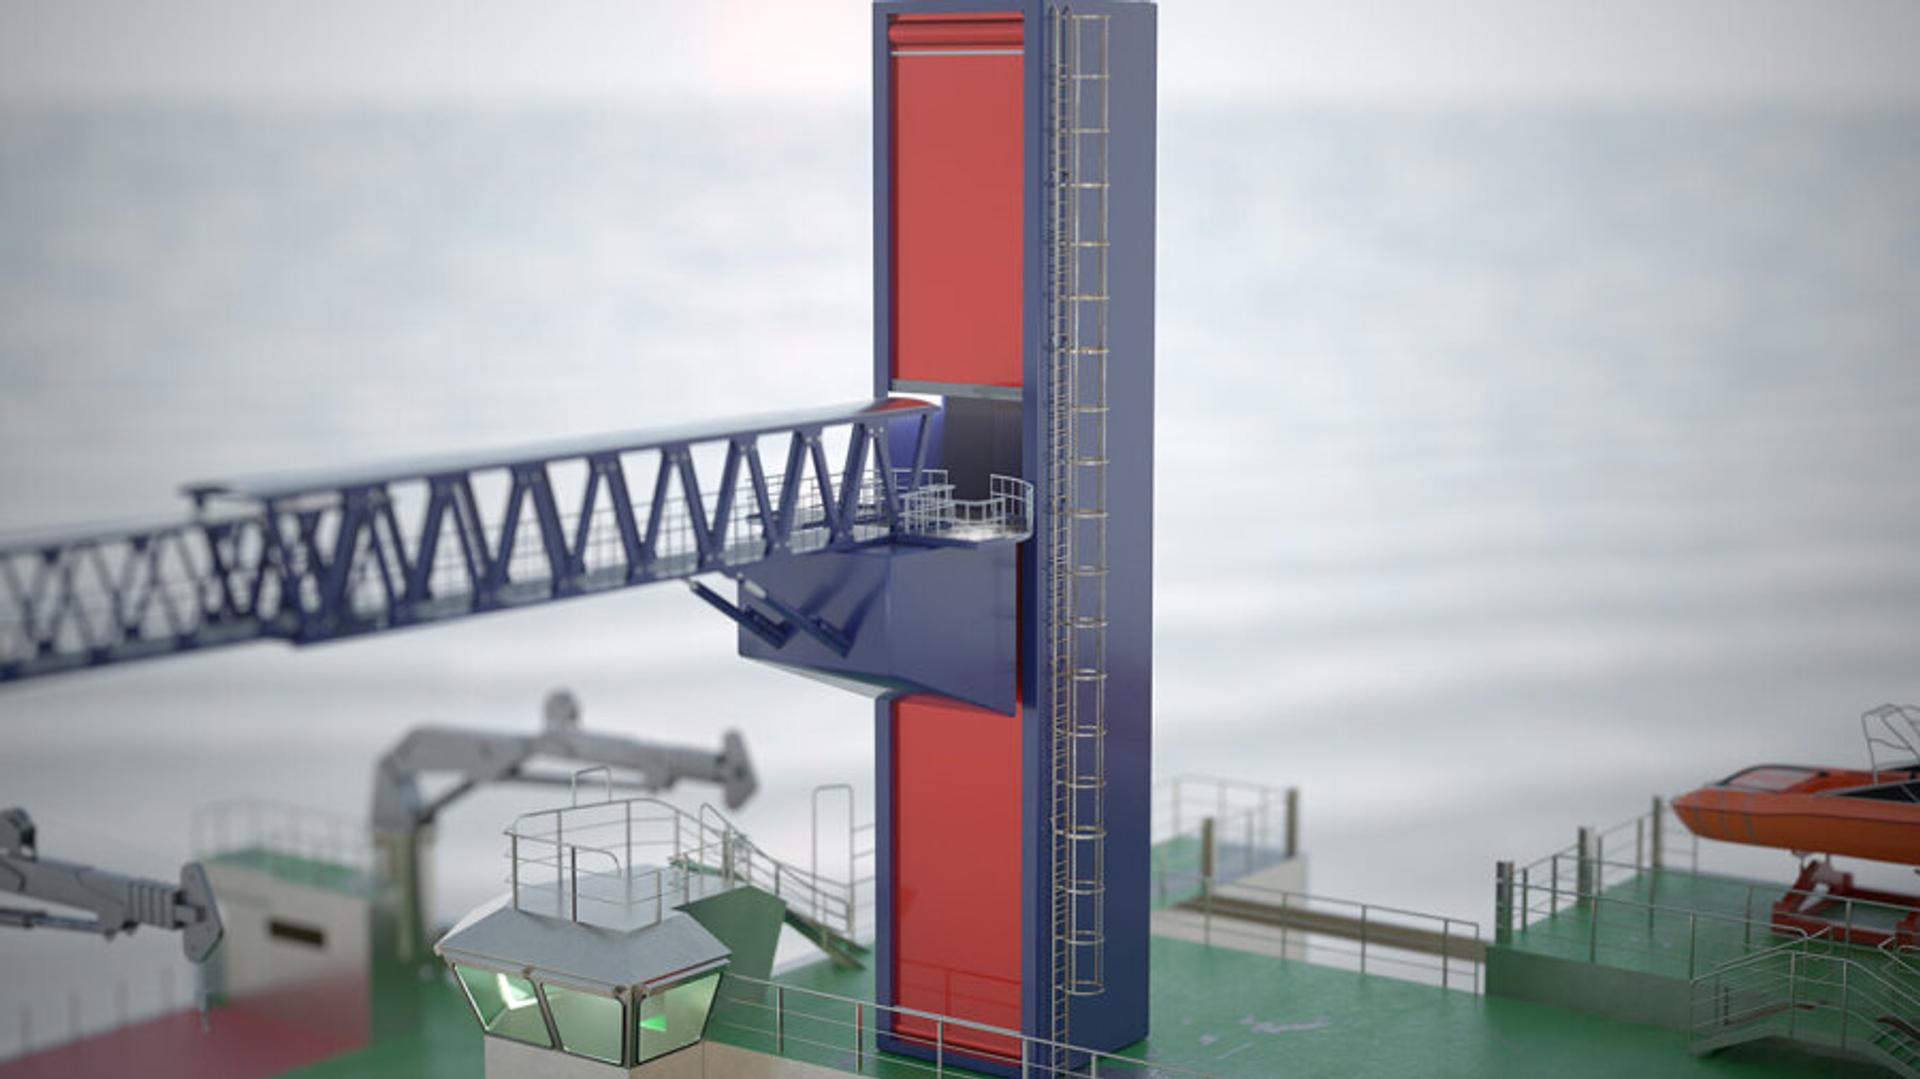 plany-introduces-textile-door-concept-for-gangway-lift-towers-in-offshore-wind